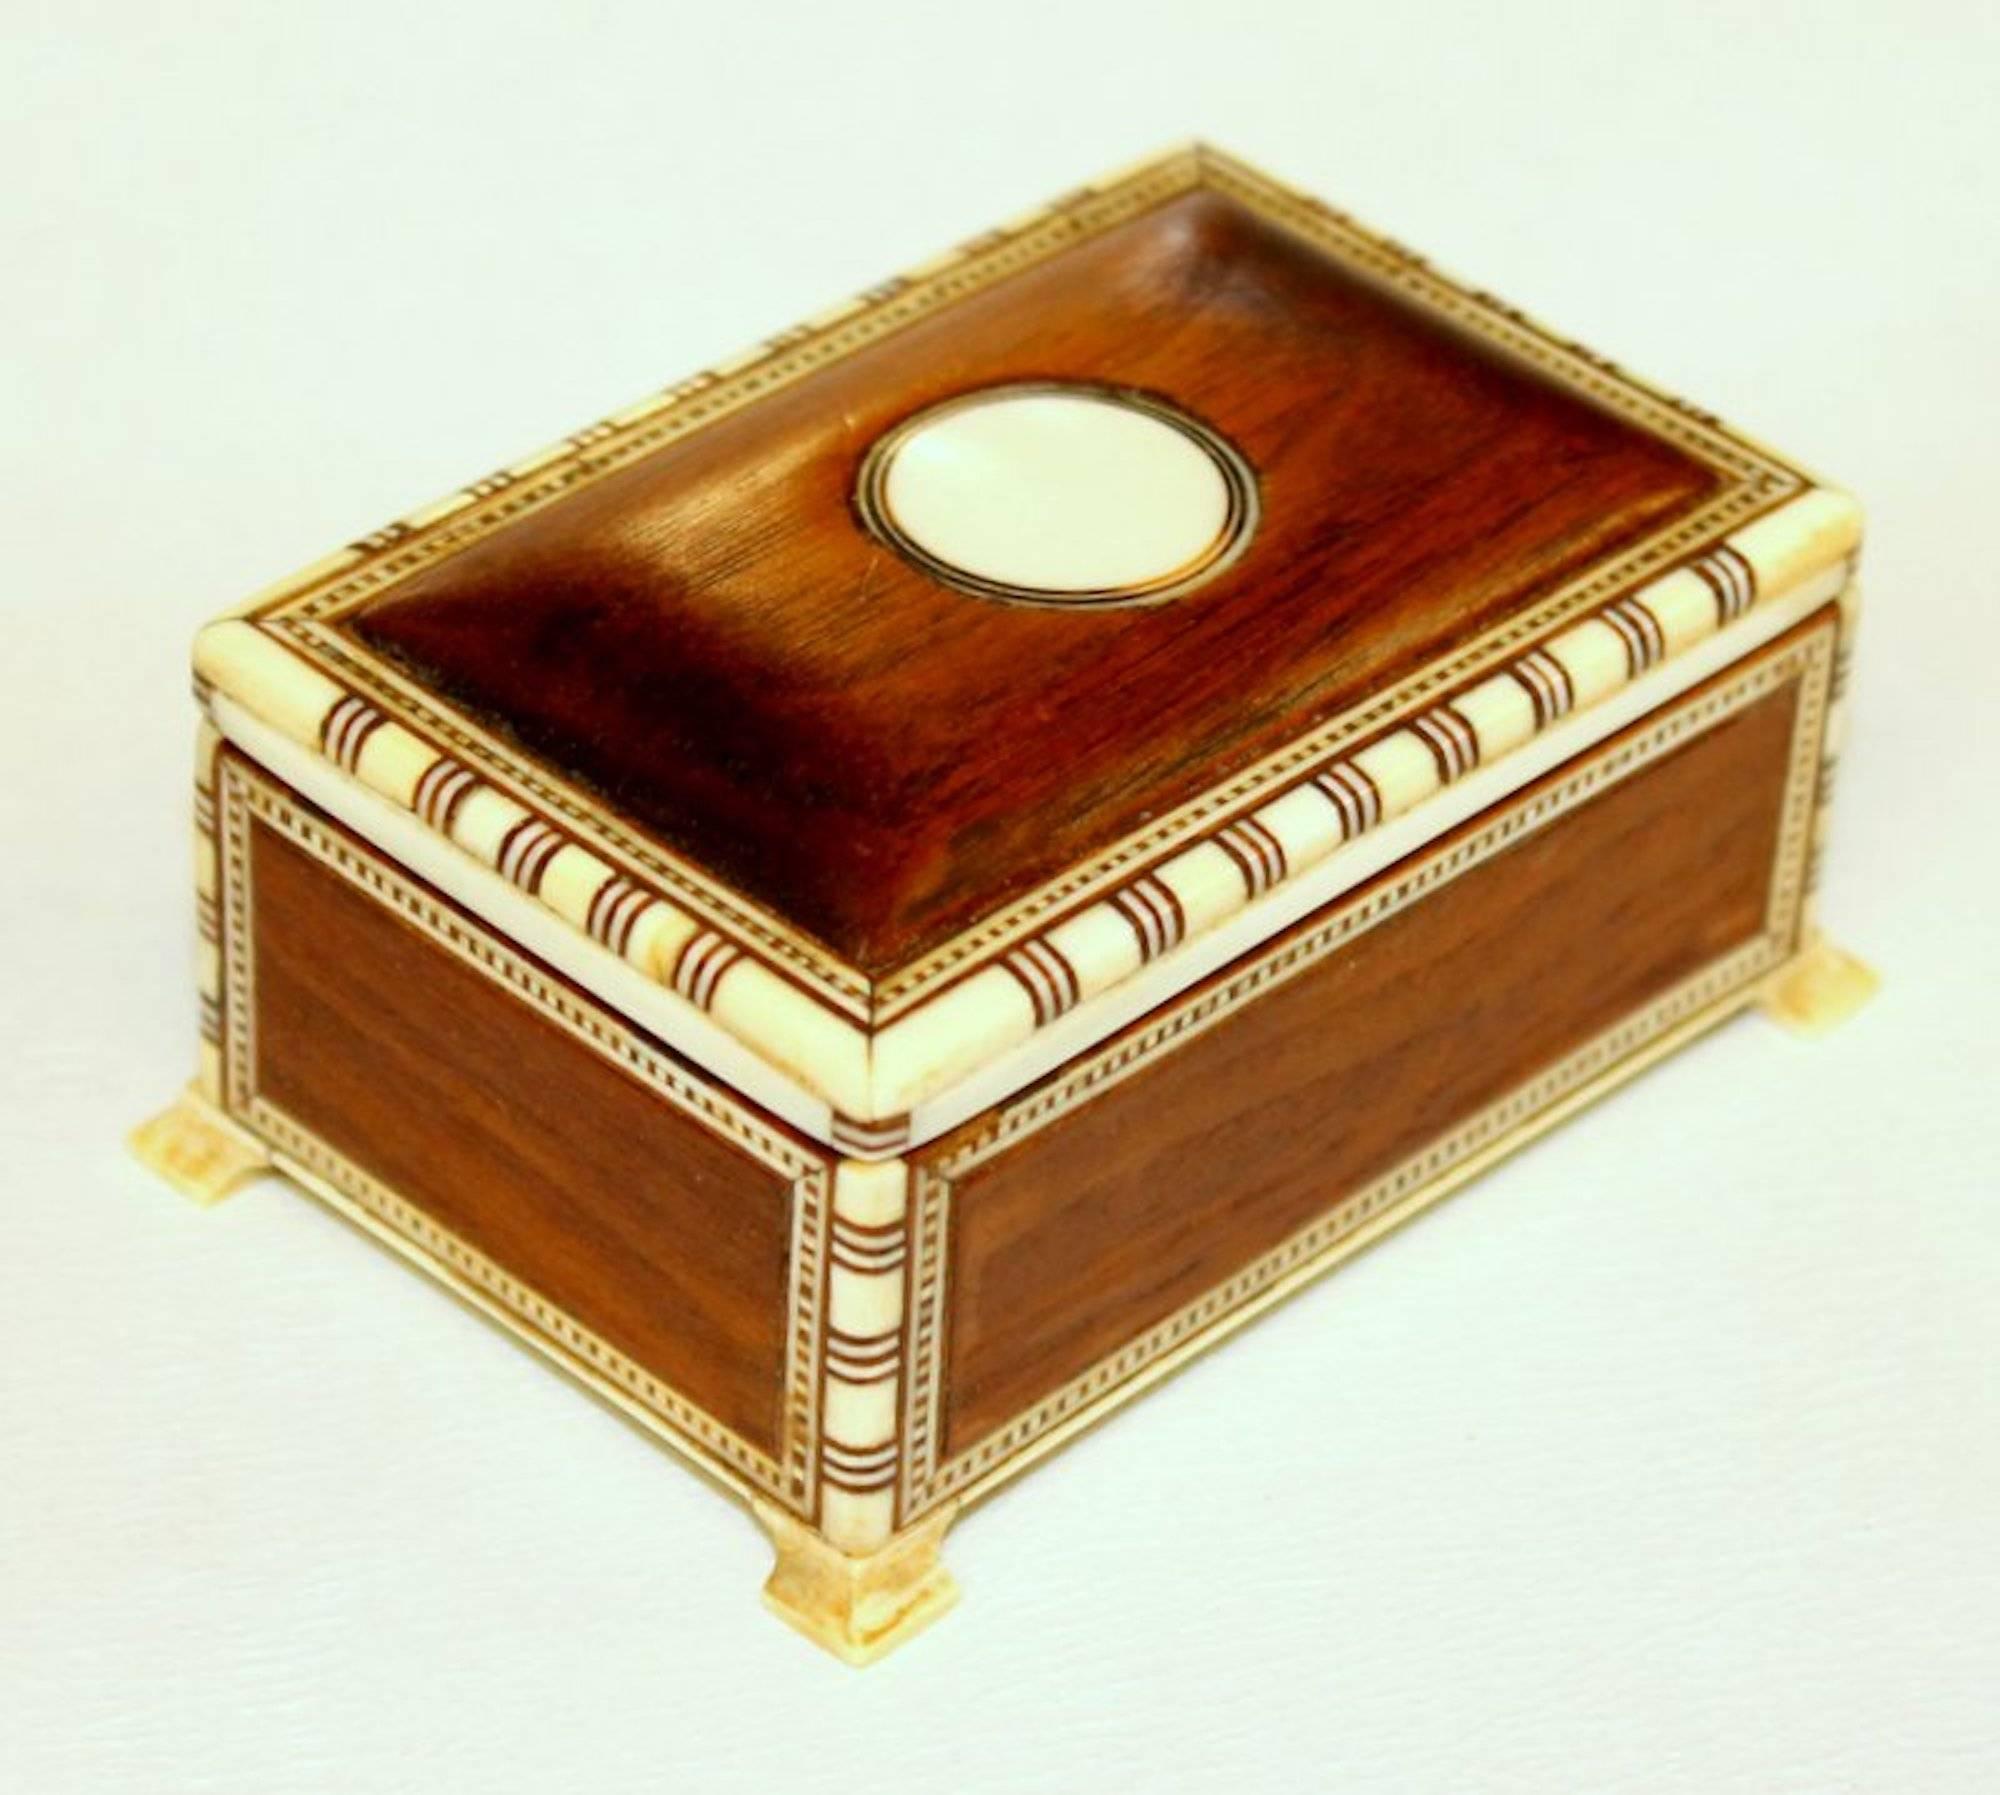 Exceptional antique bone and mahogany domed top footed ring box

Please note exceptional construction throughout. And engraved bone details throughout.